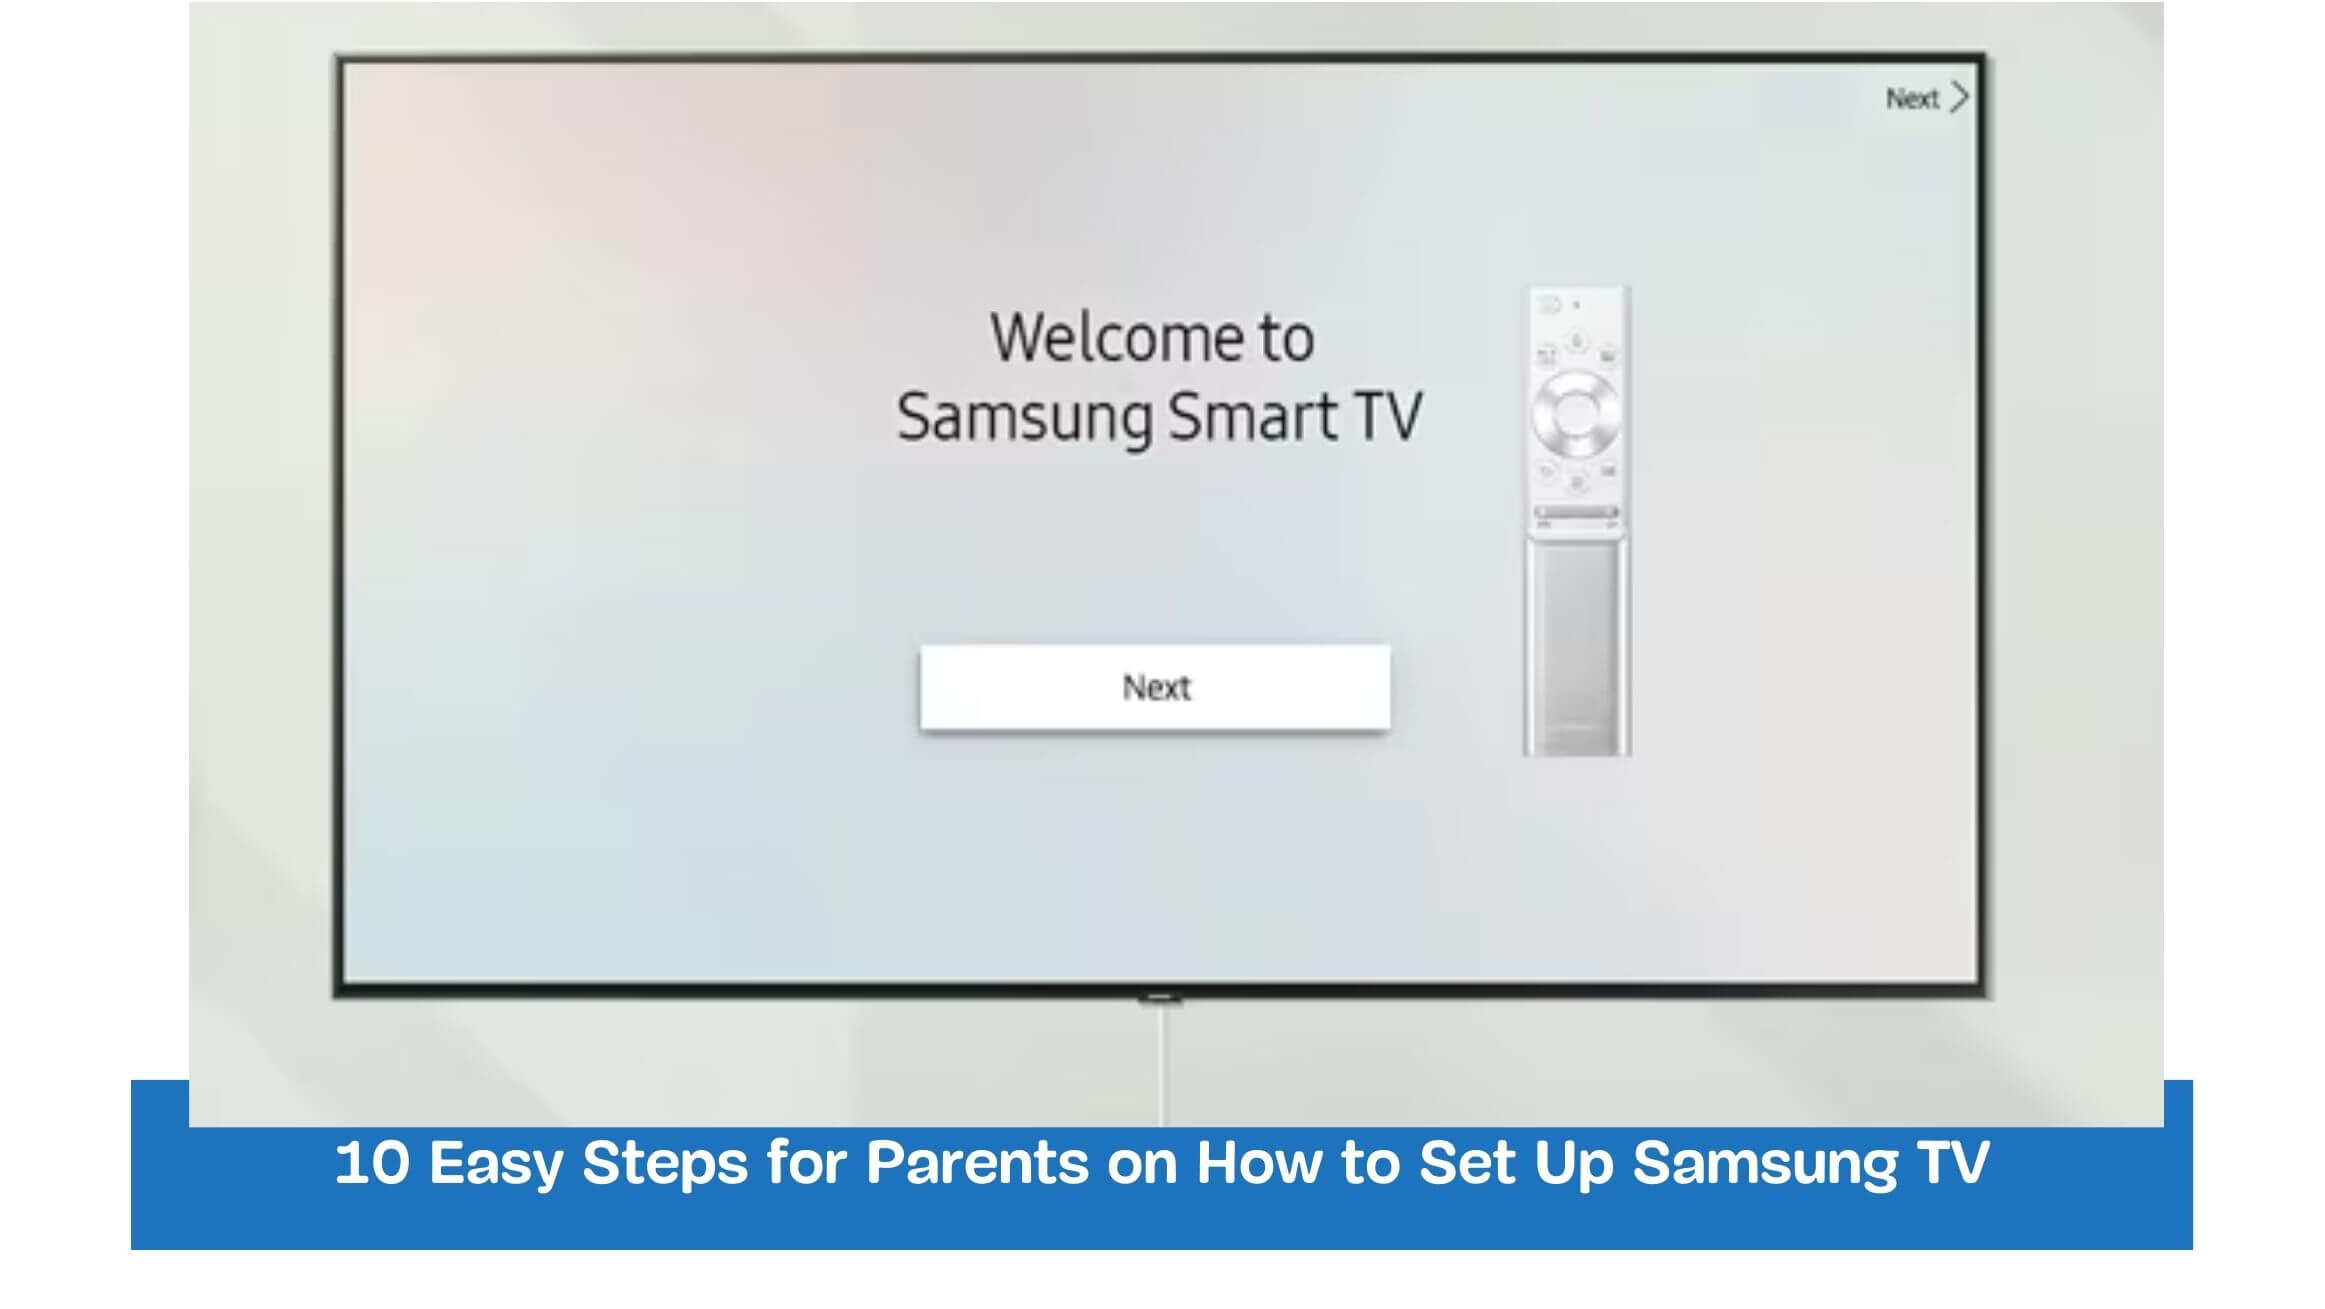 10 Easy Steps for Parents on How to Set Up Samsung TV